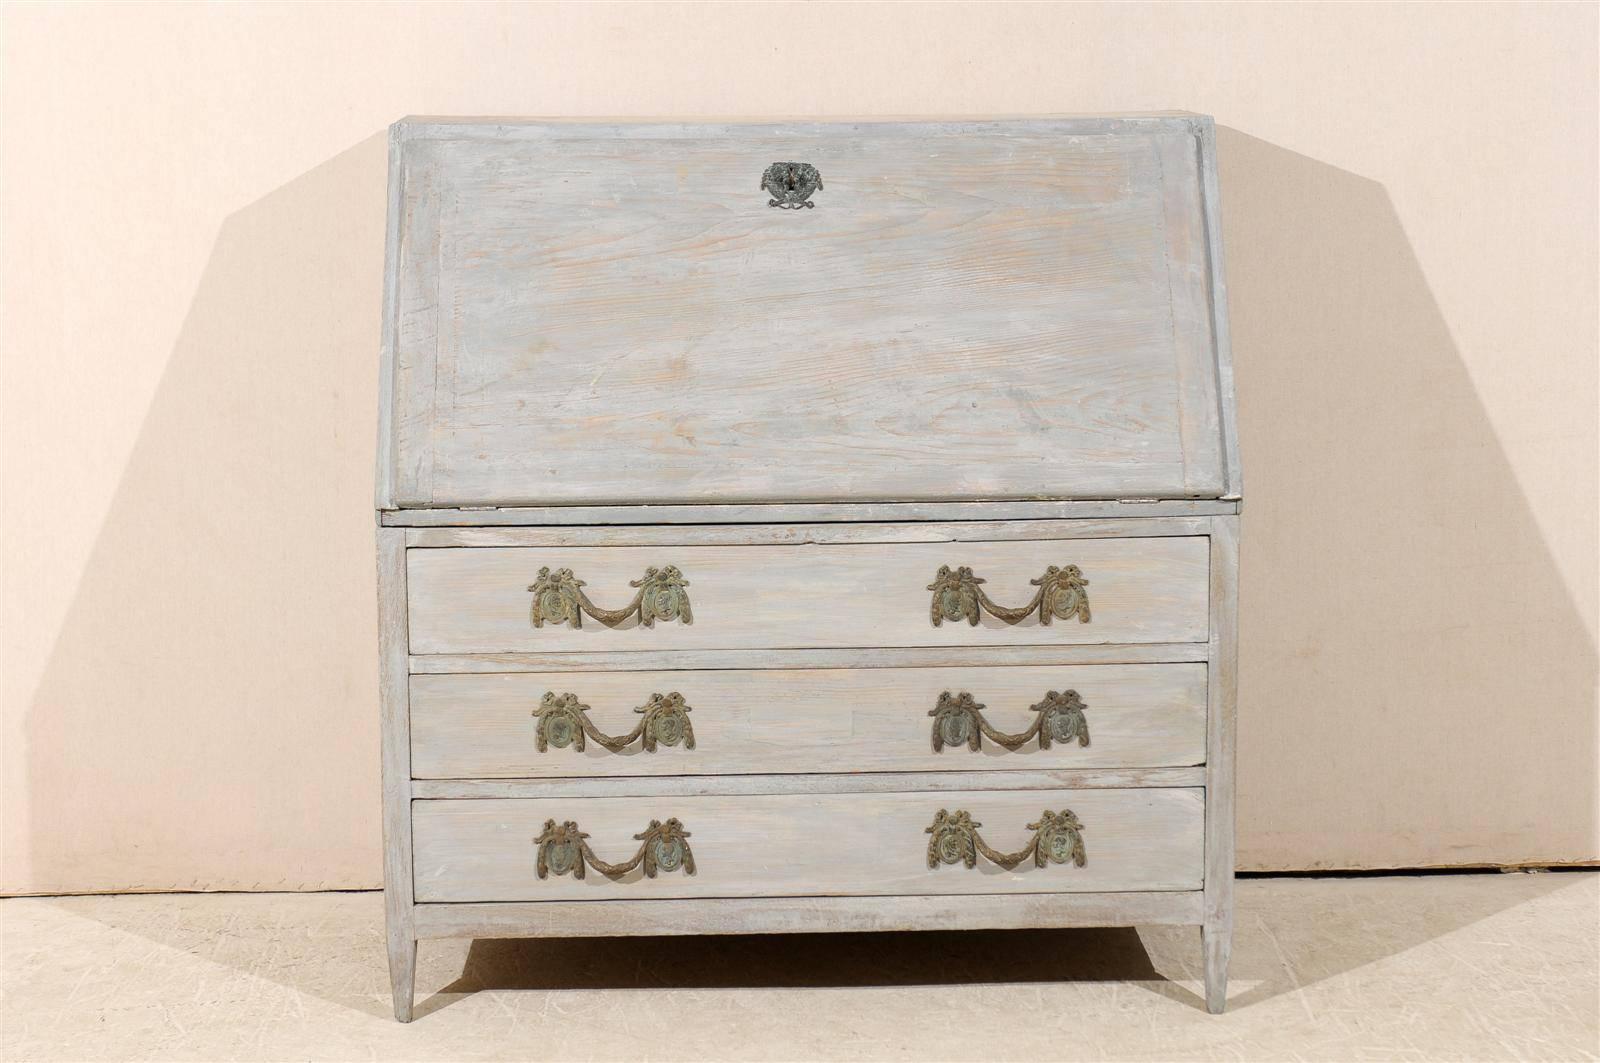 A Swedish mid-19th century painted wood Gustavian style slant-front desk or secretary with three lower drawers standing on short tapered feet.

Here are the measurements: 48